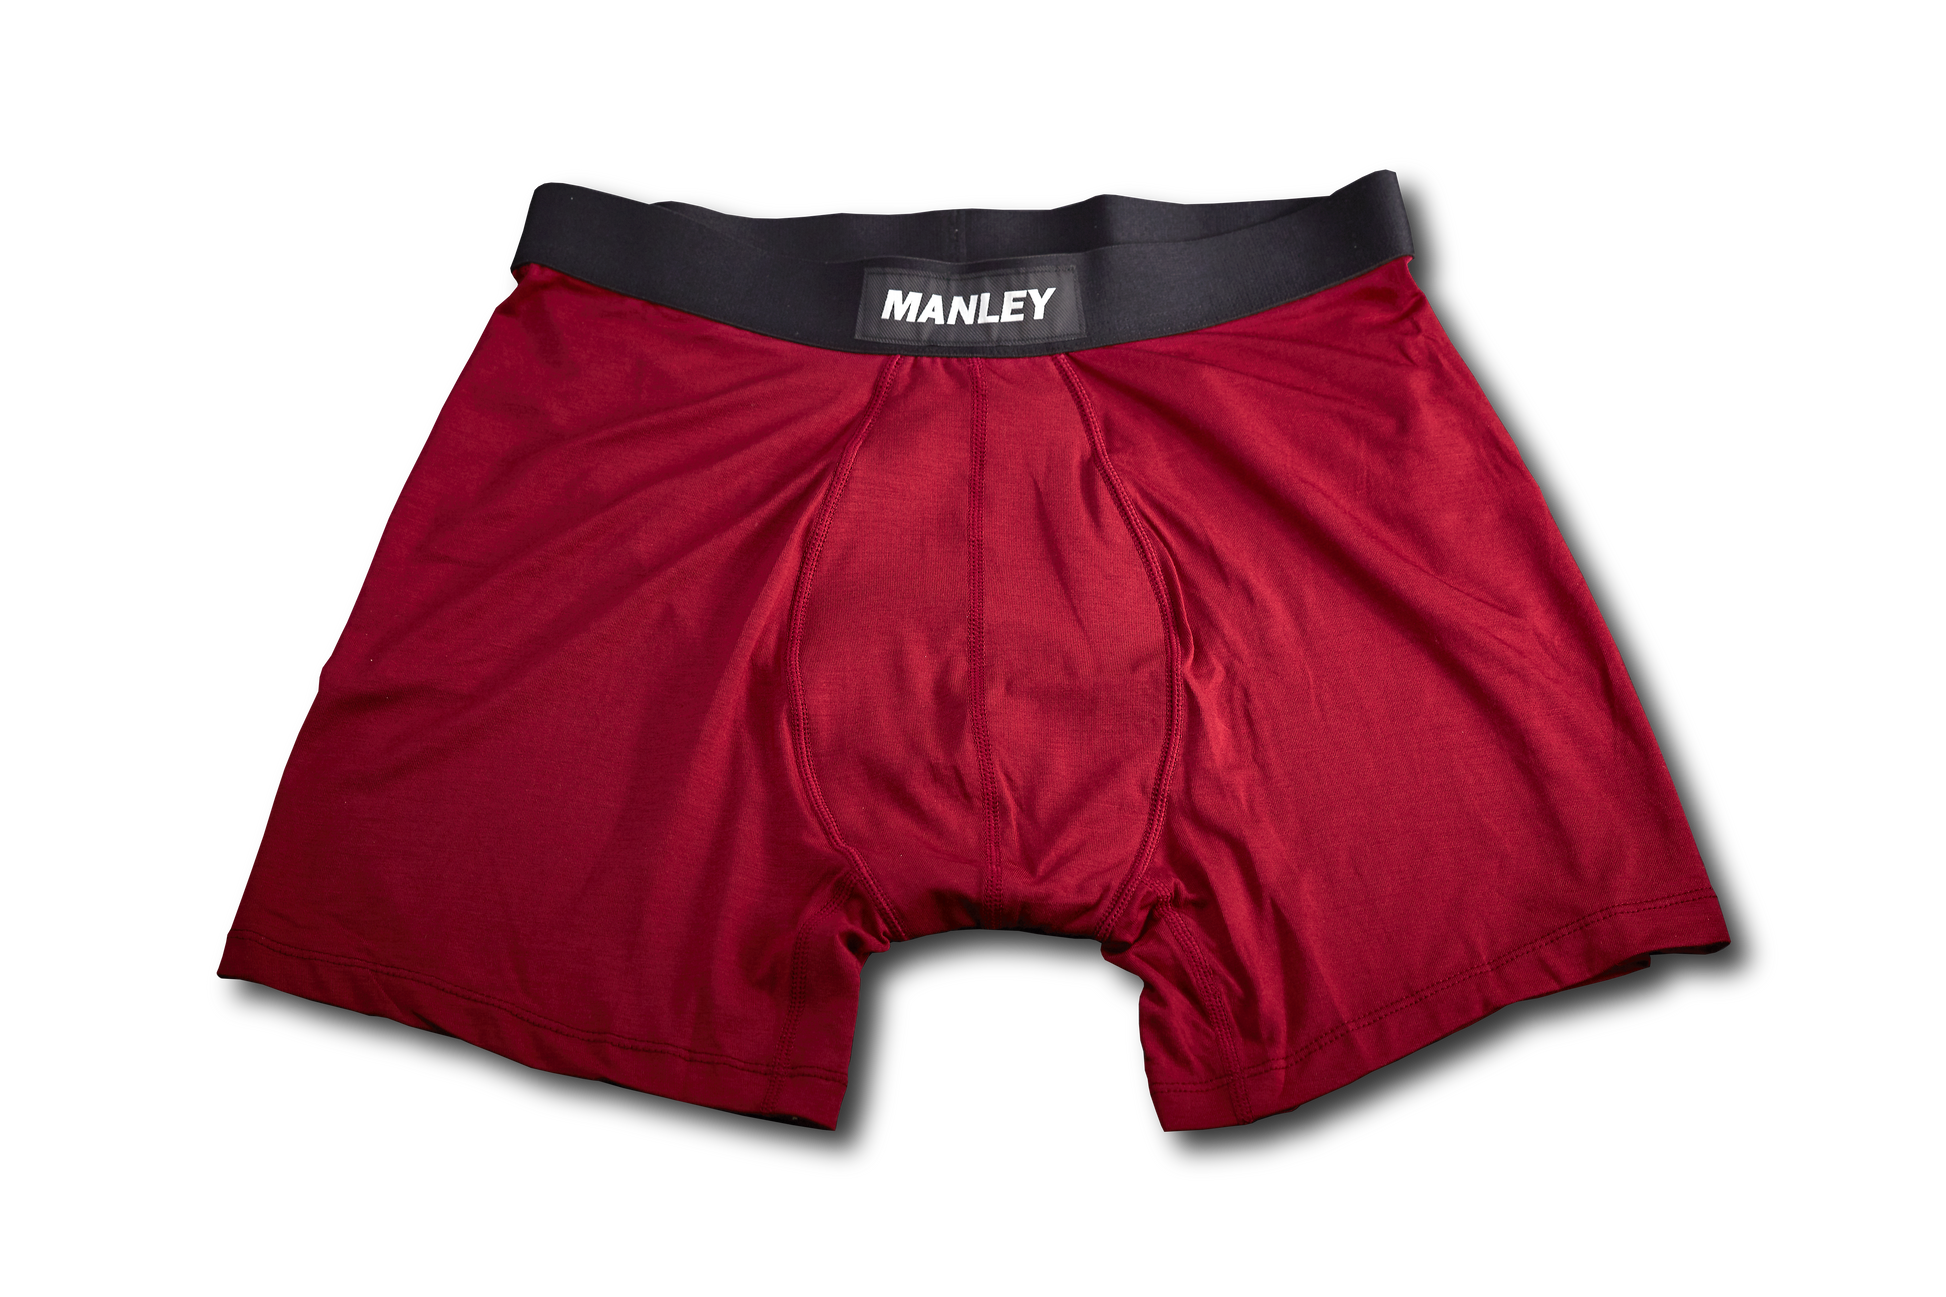 Manley Underwear aims to stop the Pee Spot, start a conversation - Orillia  News